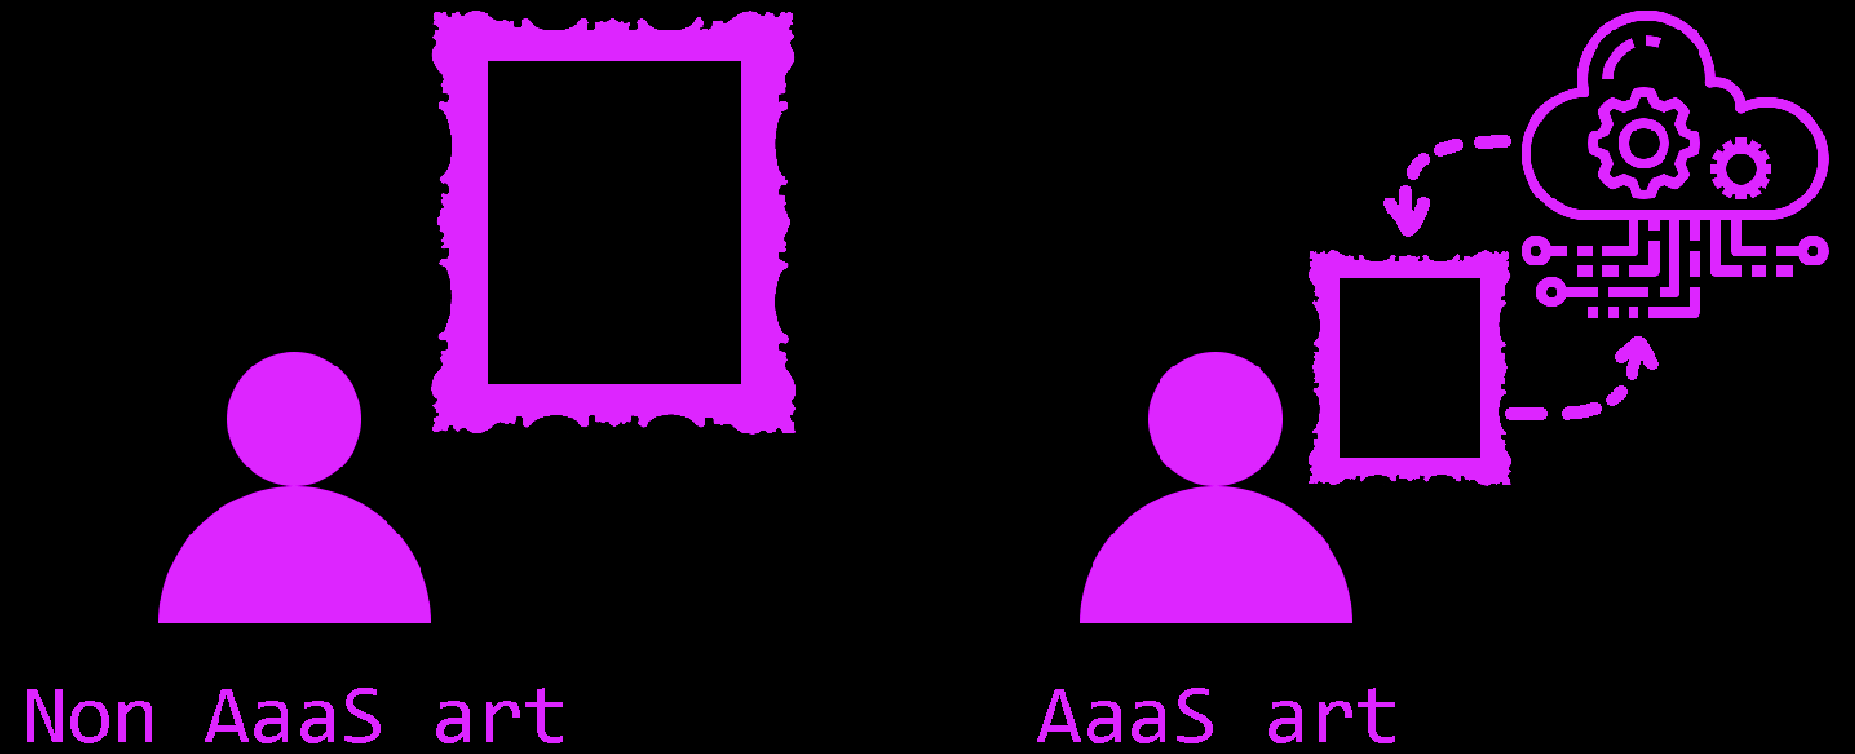 Icons explaining the difference between AaaS and Non-AaaS art